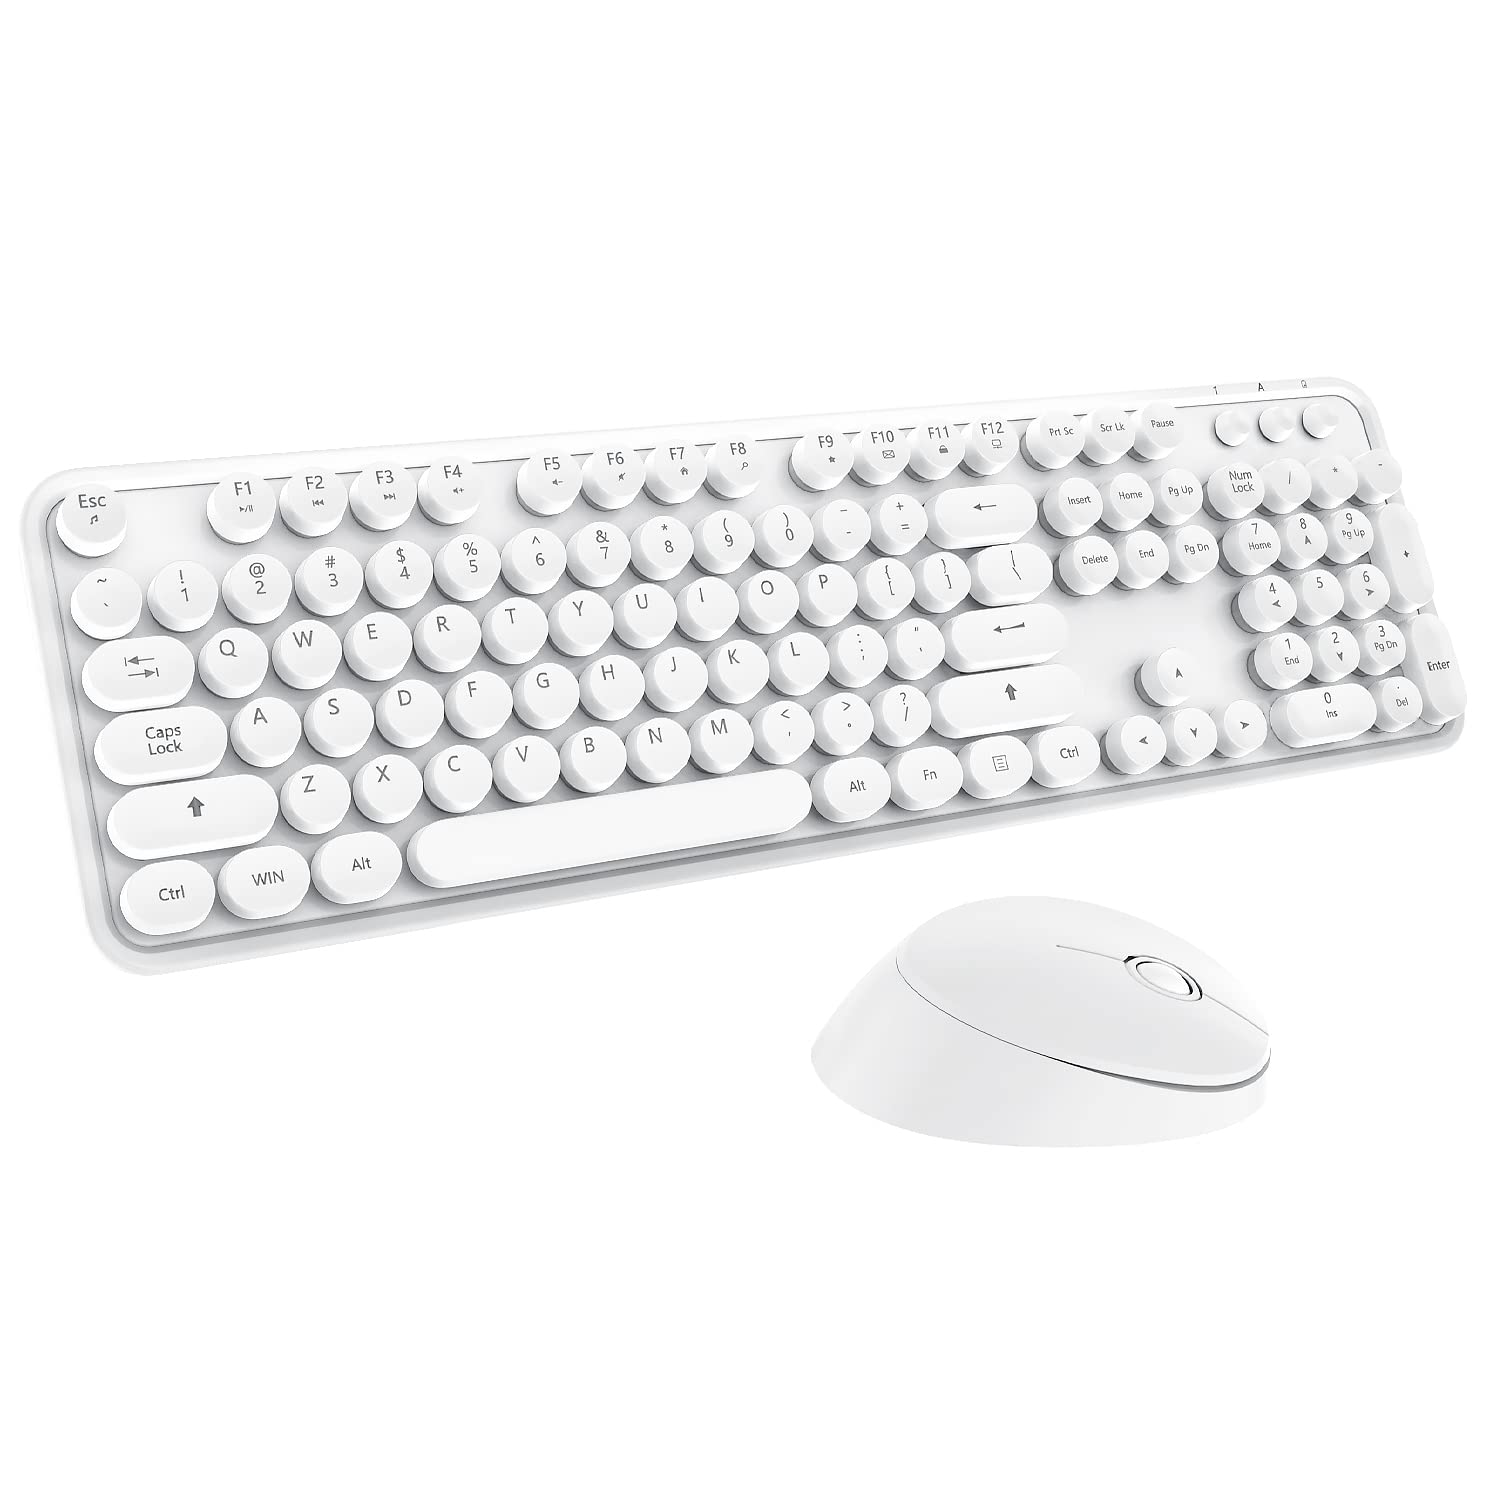 Wireless Keyboard Mouse Combo, Colorful Mouse and Keyboard Combo, 104 Keys Cute Wireless Keyboard with Number Pad for Windows, Computer, PC, Notebook, Laptop (White)